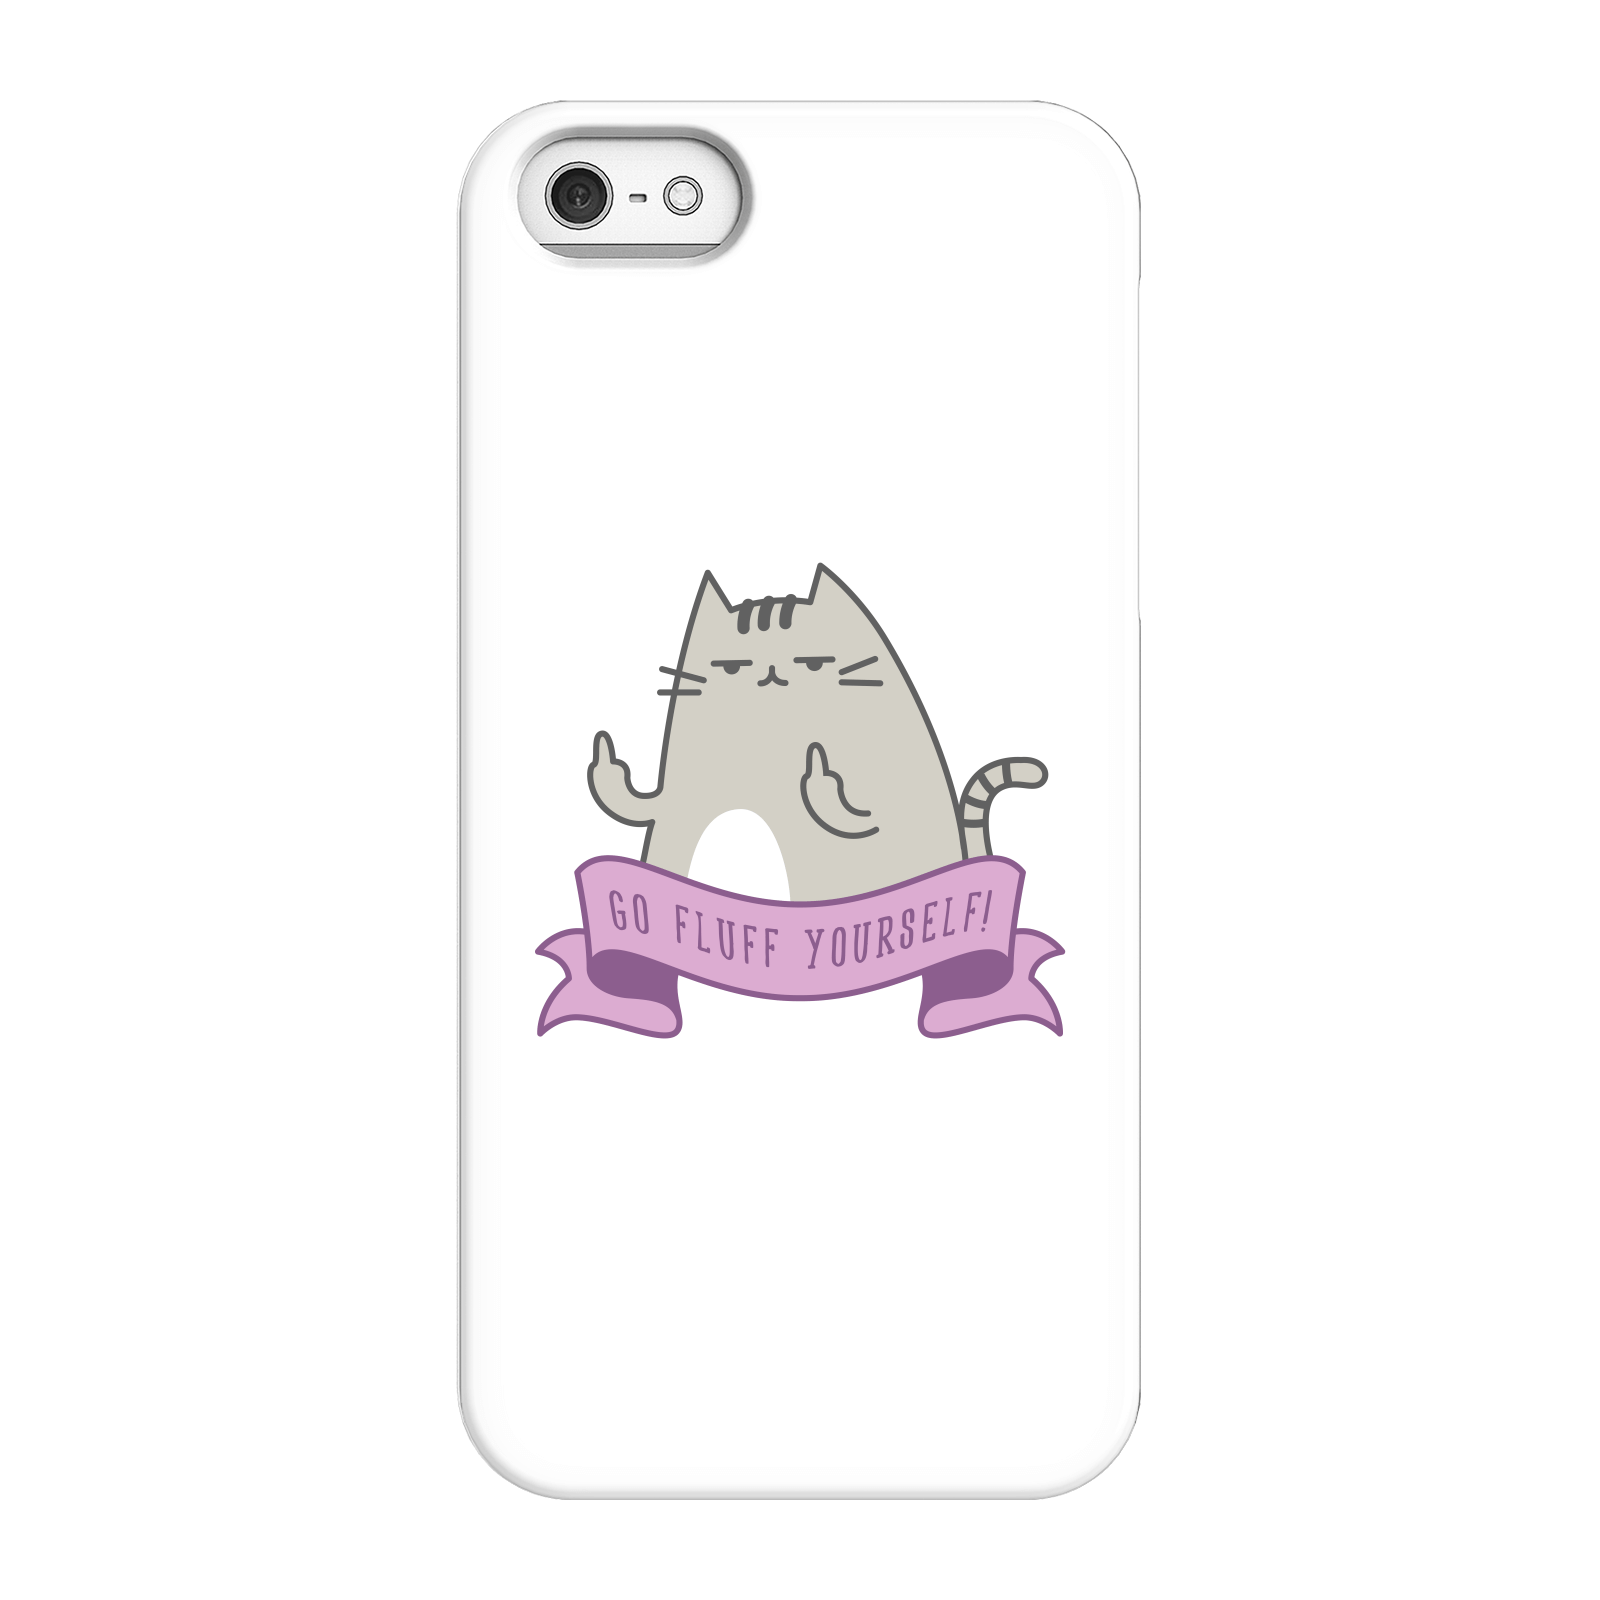 Go Fluff Yourself! Phone Case for iPhone and Android - iPhone 5/5s - Snap Case - Matte